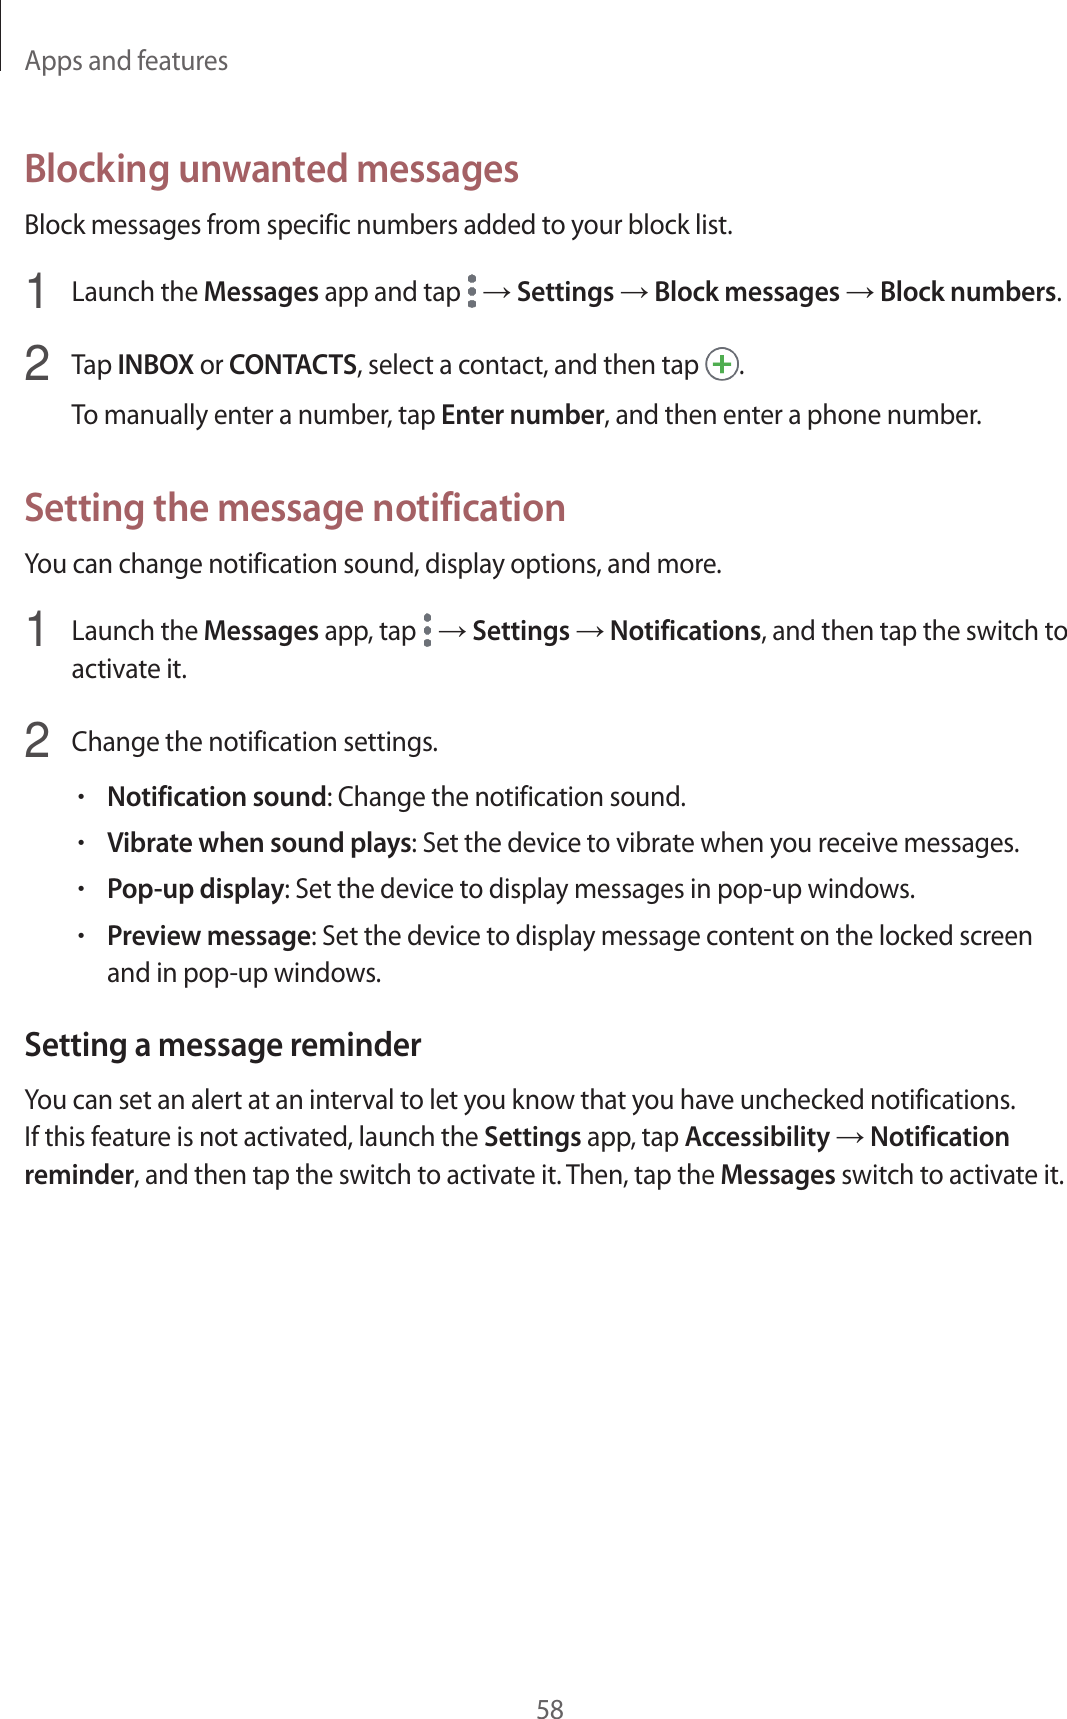 Apps and features58Blocking unwanted messagesBlock messages from specific numbers added to your block list.1  Launch the Messages app and tap   → Settings → Block messages → Block numbers.2  Tap INBOX or CONTACTS, select a contact, and then tap  .To manually enter a number, tap Enter number, and then enter a phone number.Setting the message notificationYou can change notification sound, display options, and more.1  Launch the Messages app, tap   → Settings → Notifications, and then tap the switch to activate it.2  Change the notification settings.•Notification sound: Change the notification sound.•Vibrate when sound plays: Set the device to vibrate when you receive messages.•Pop-up display: Set the device to display messages in pop-up windows.•Preview message: Set the device to display message content on the locked screen and in pop-up windows.Setting a message reminderYou can set an alert at an interval to let you know that you have unchecked notifications. If this feature is not activated, launch the Settings app, tap Accessibility → Notification reminder, and then tap the switch to activate it. Then, tap the Messages switch to activate it.